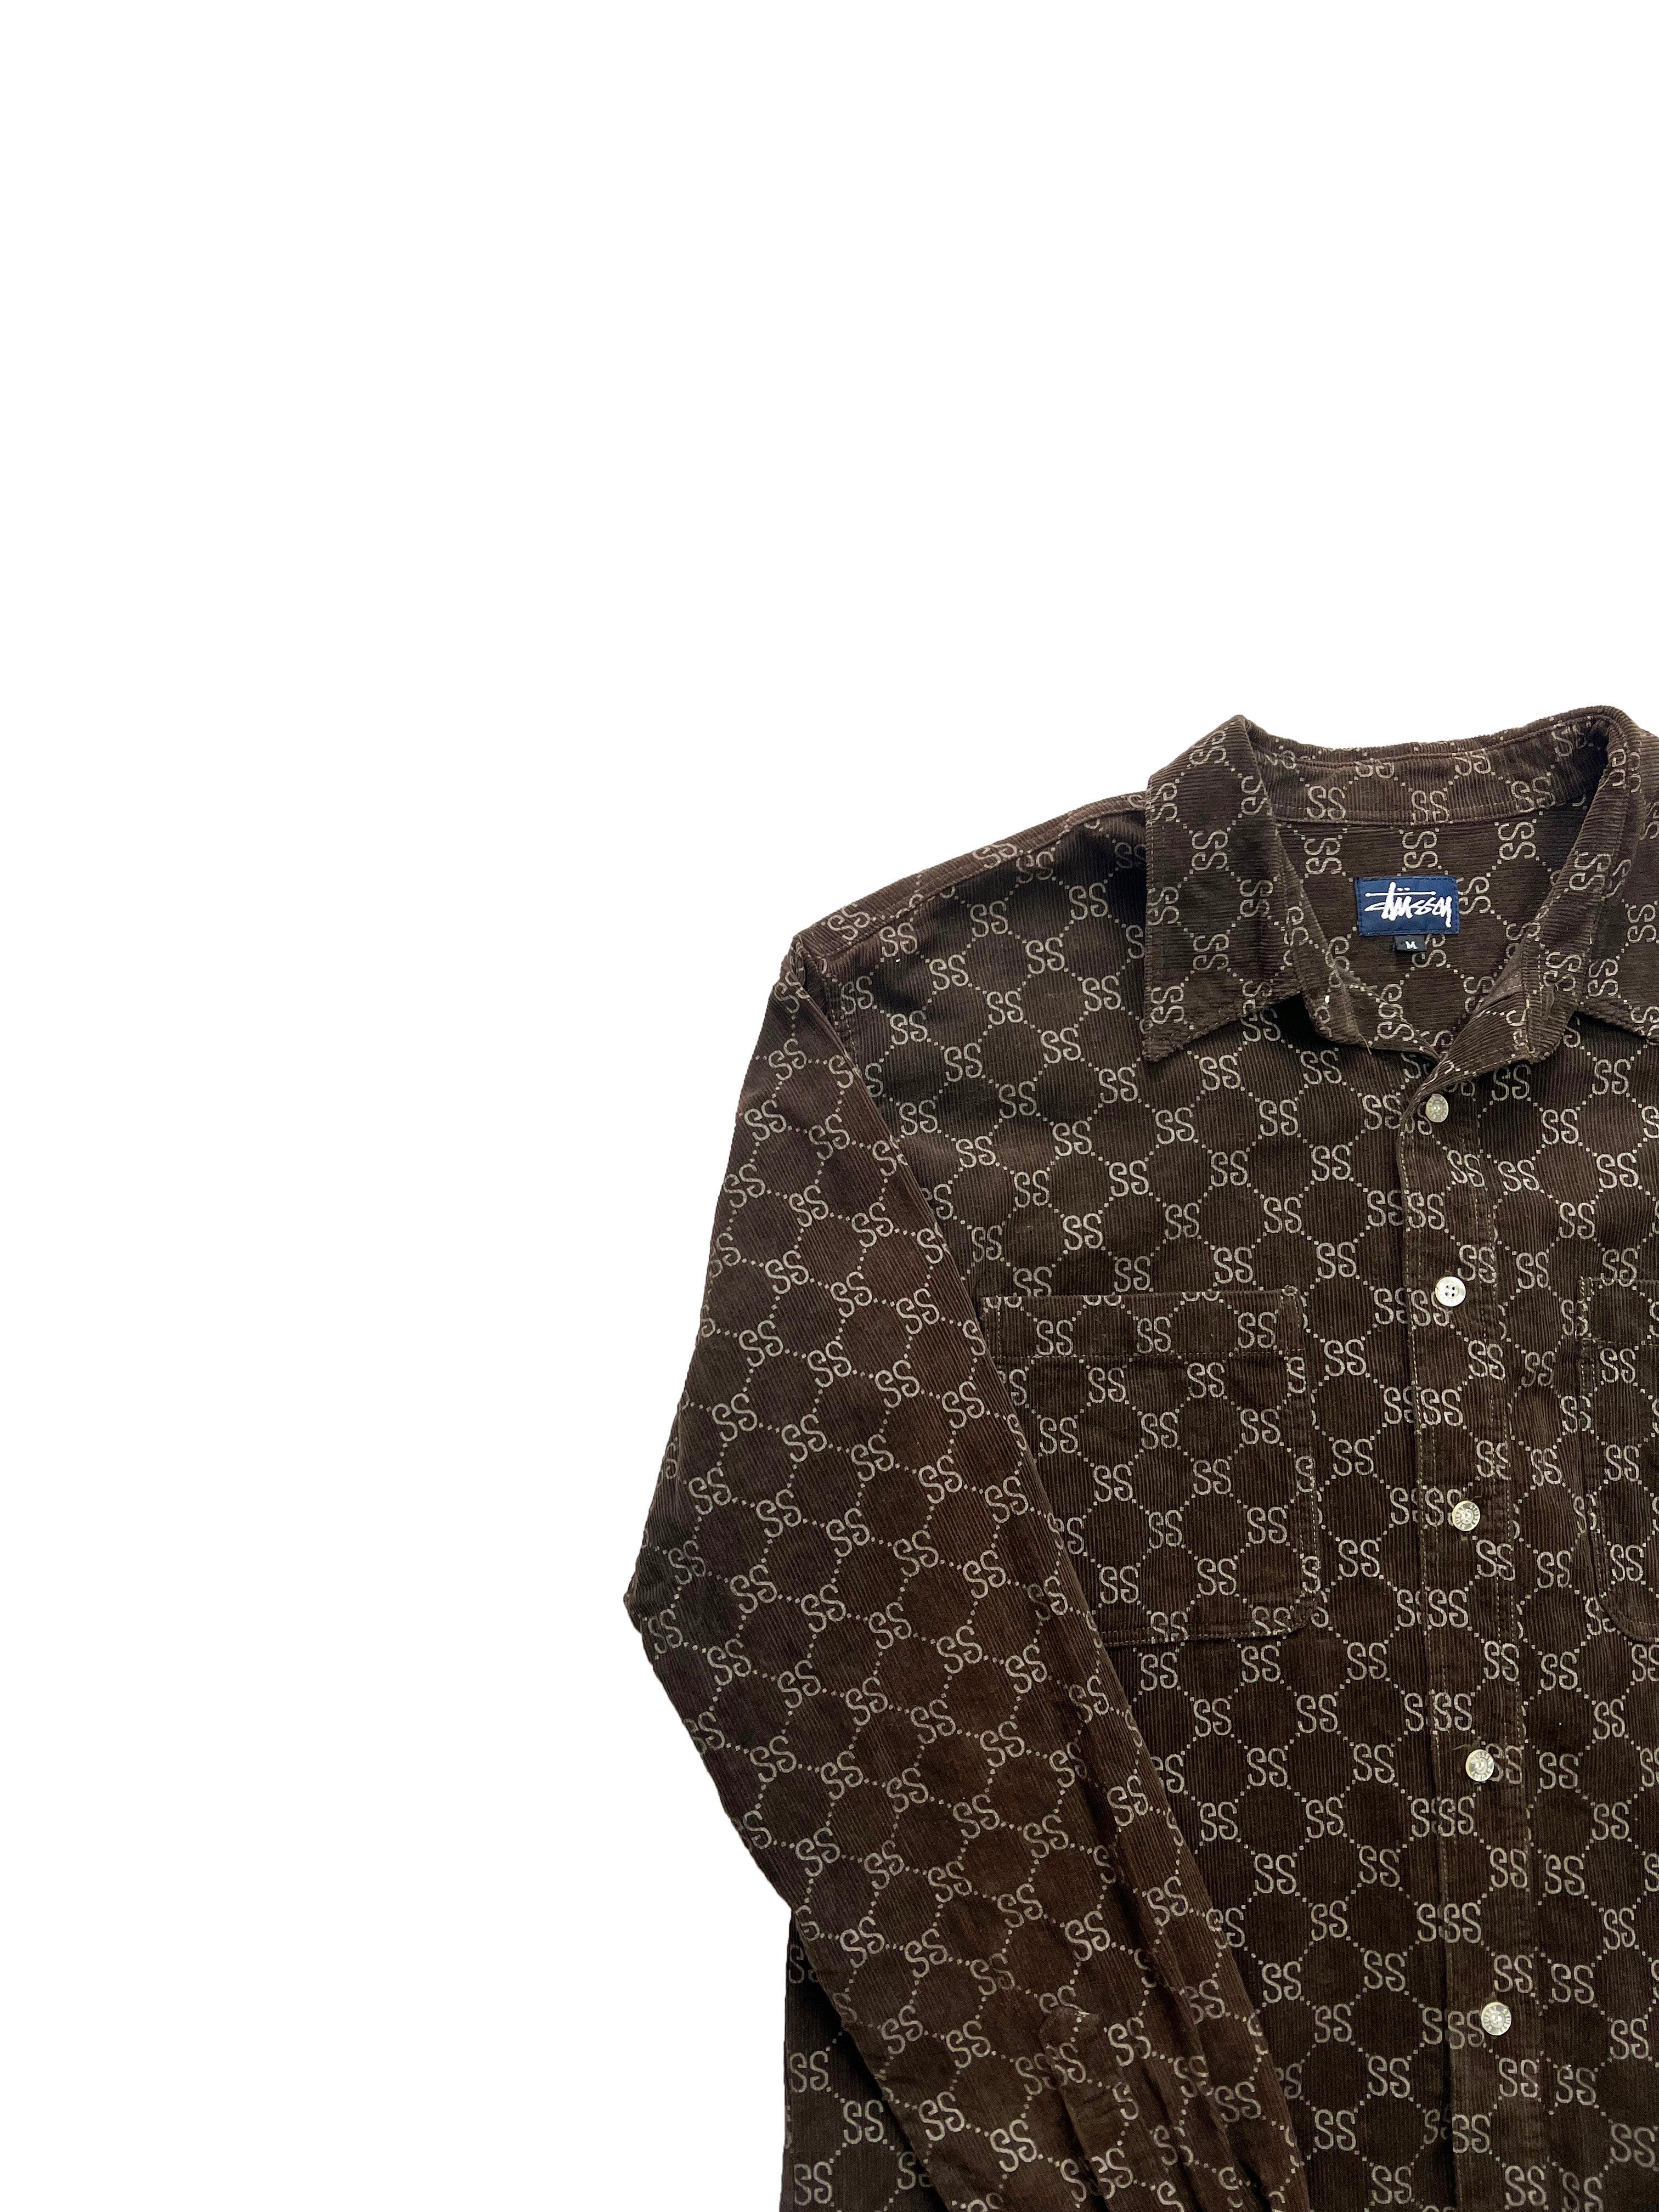 Stussy Brown/Gold Monogram Shirt (1990's) PRE-OWNED – On The Arm